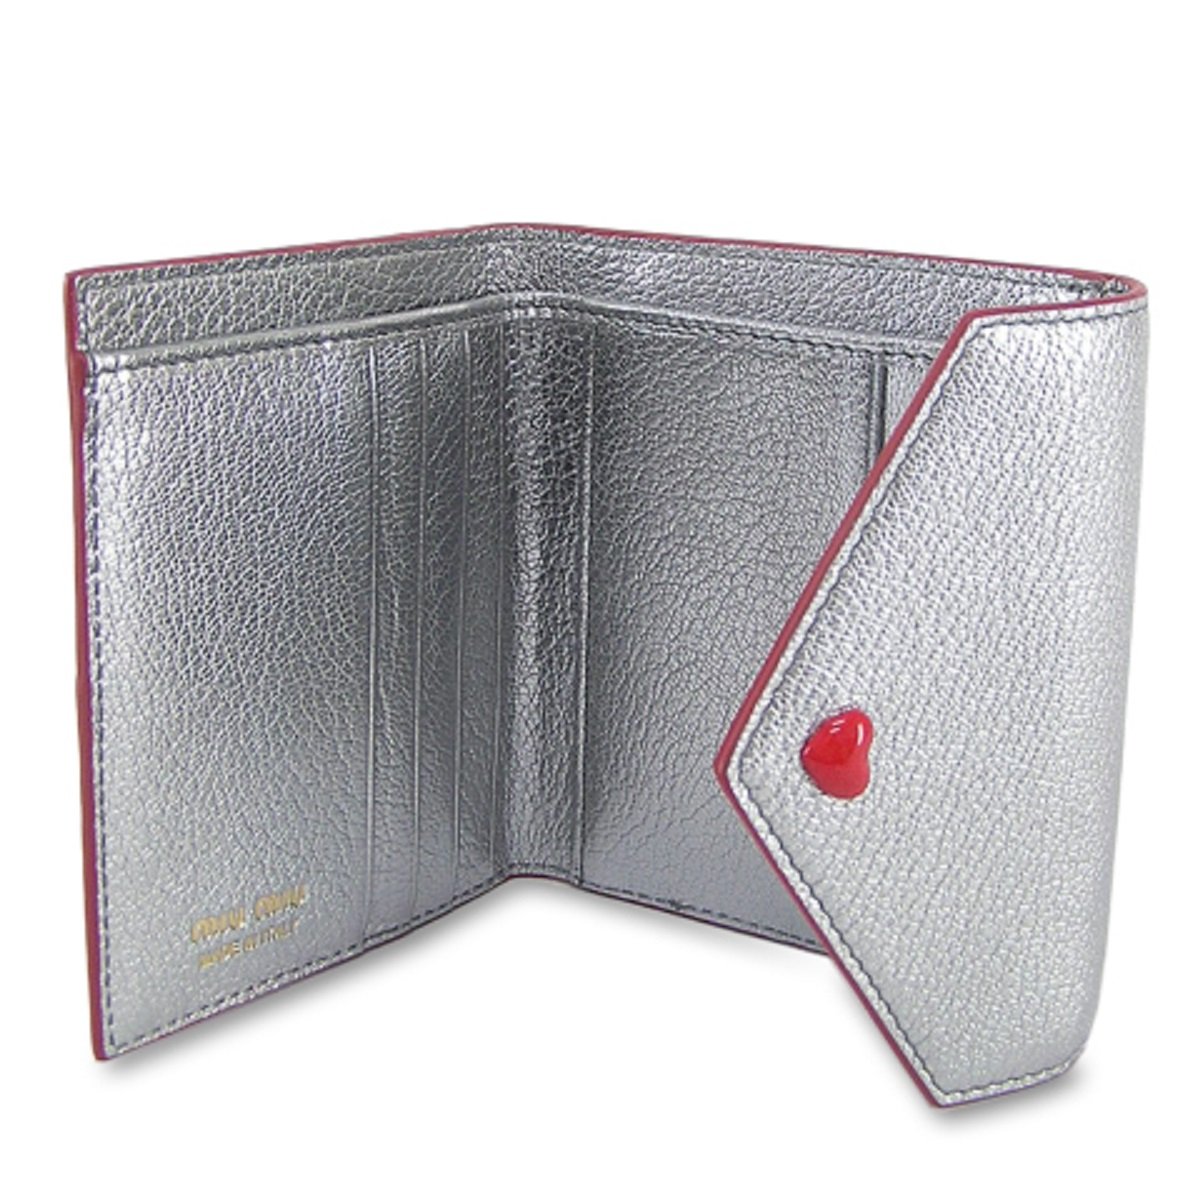 Miu Miu Silver Cromo Madras Forever Glitter Leather Heart Love Wallet 5MH014 at_Queen_Bee_of_Beverly_Hills